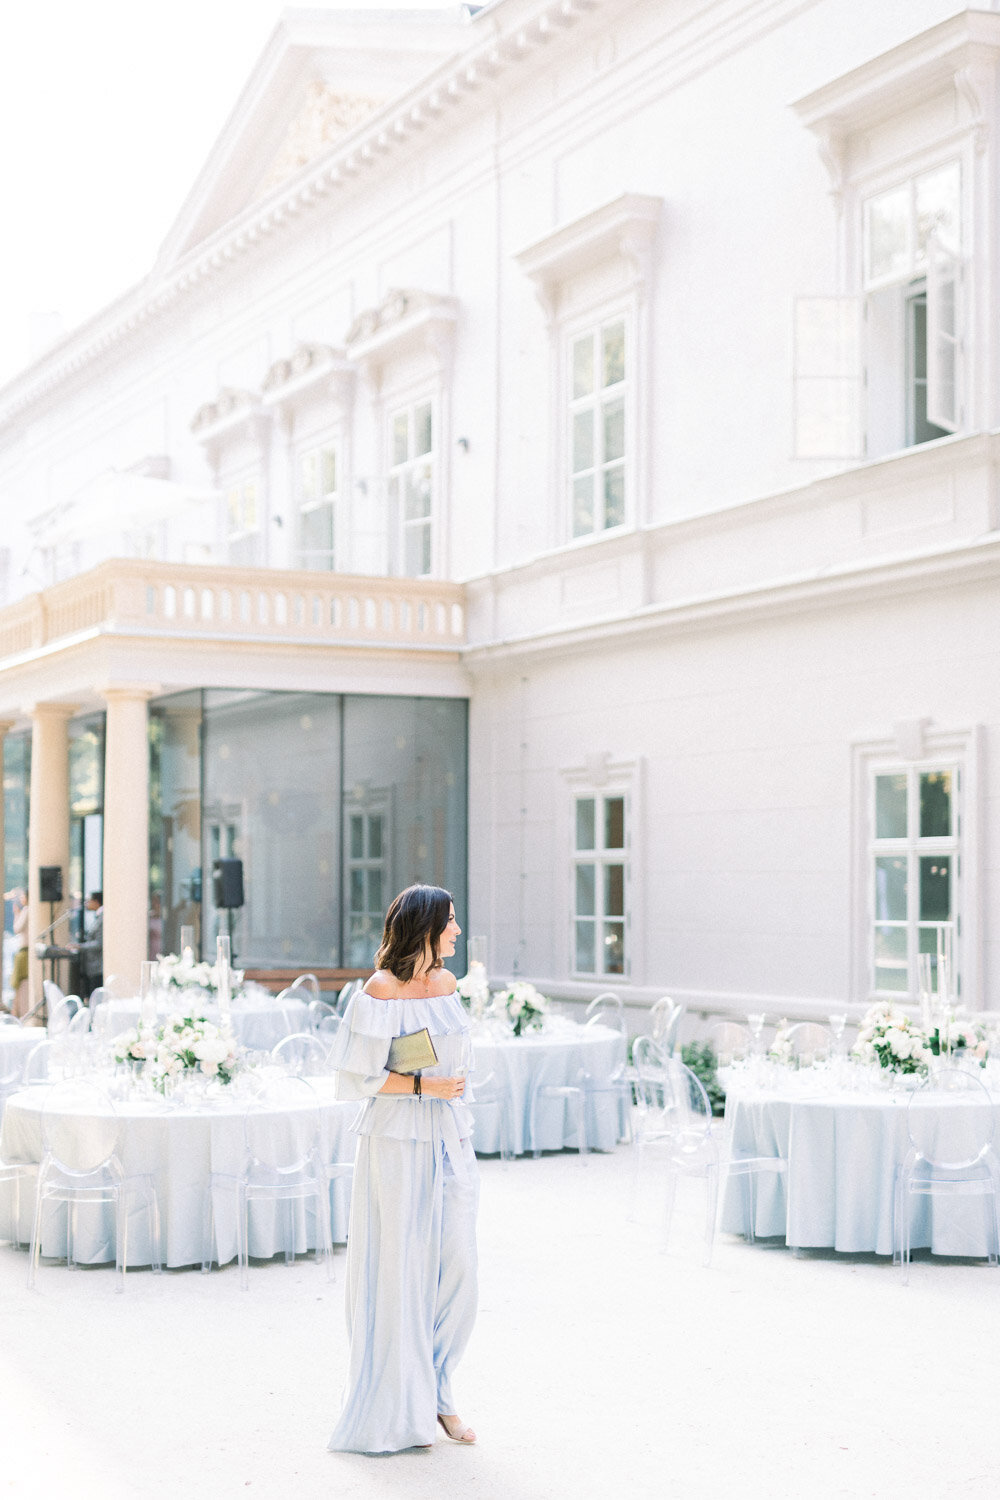 wedding outdoor reception in muted colors